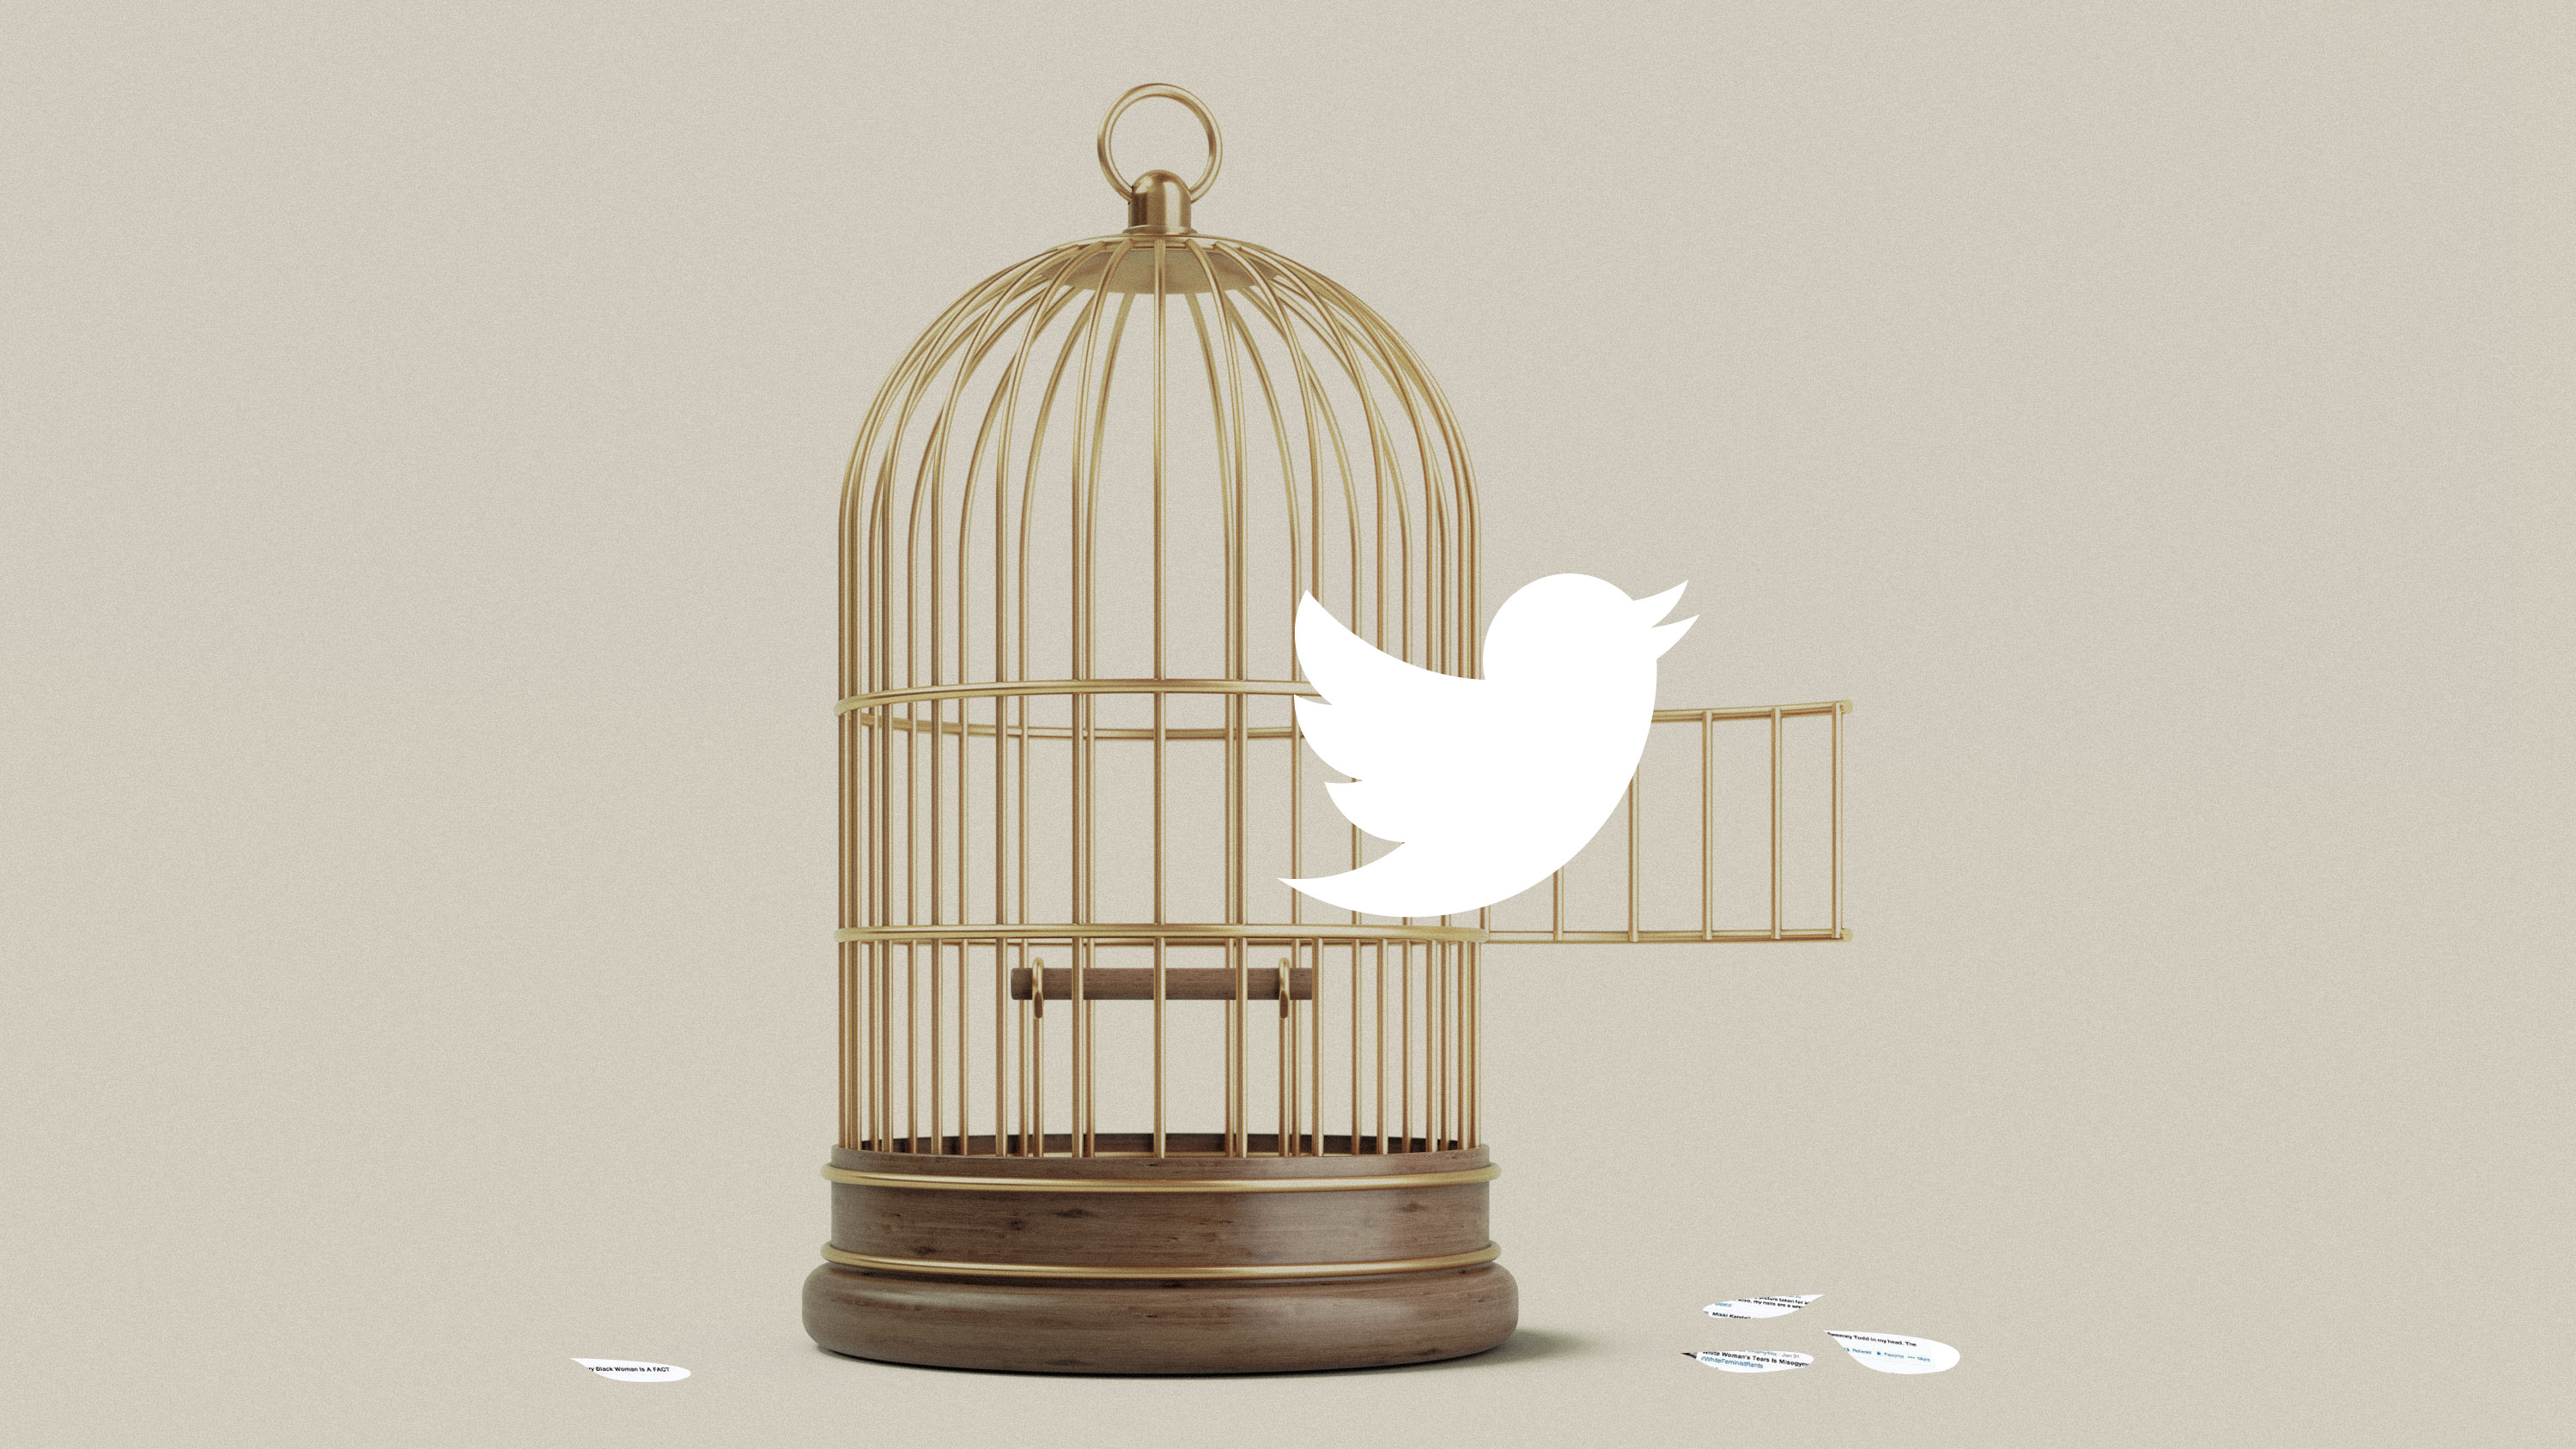 Twitter icon escapes from birdcage